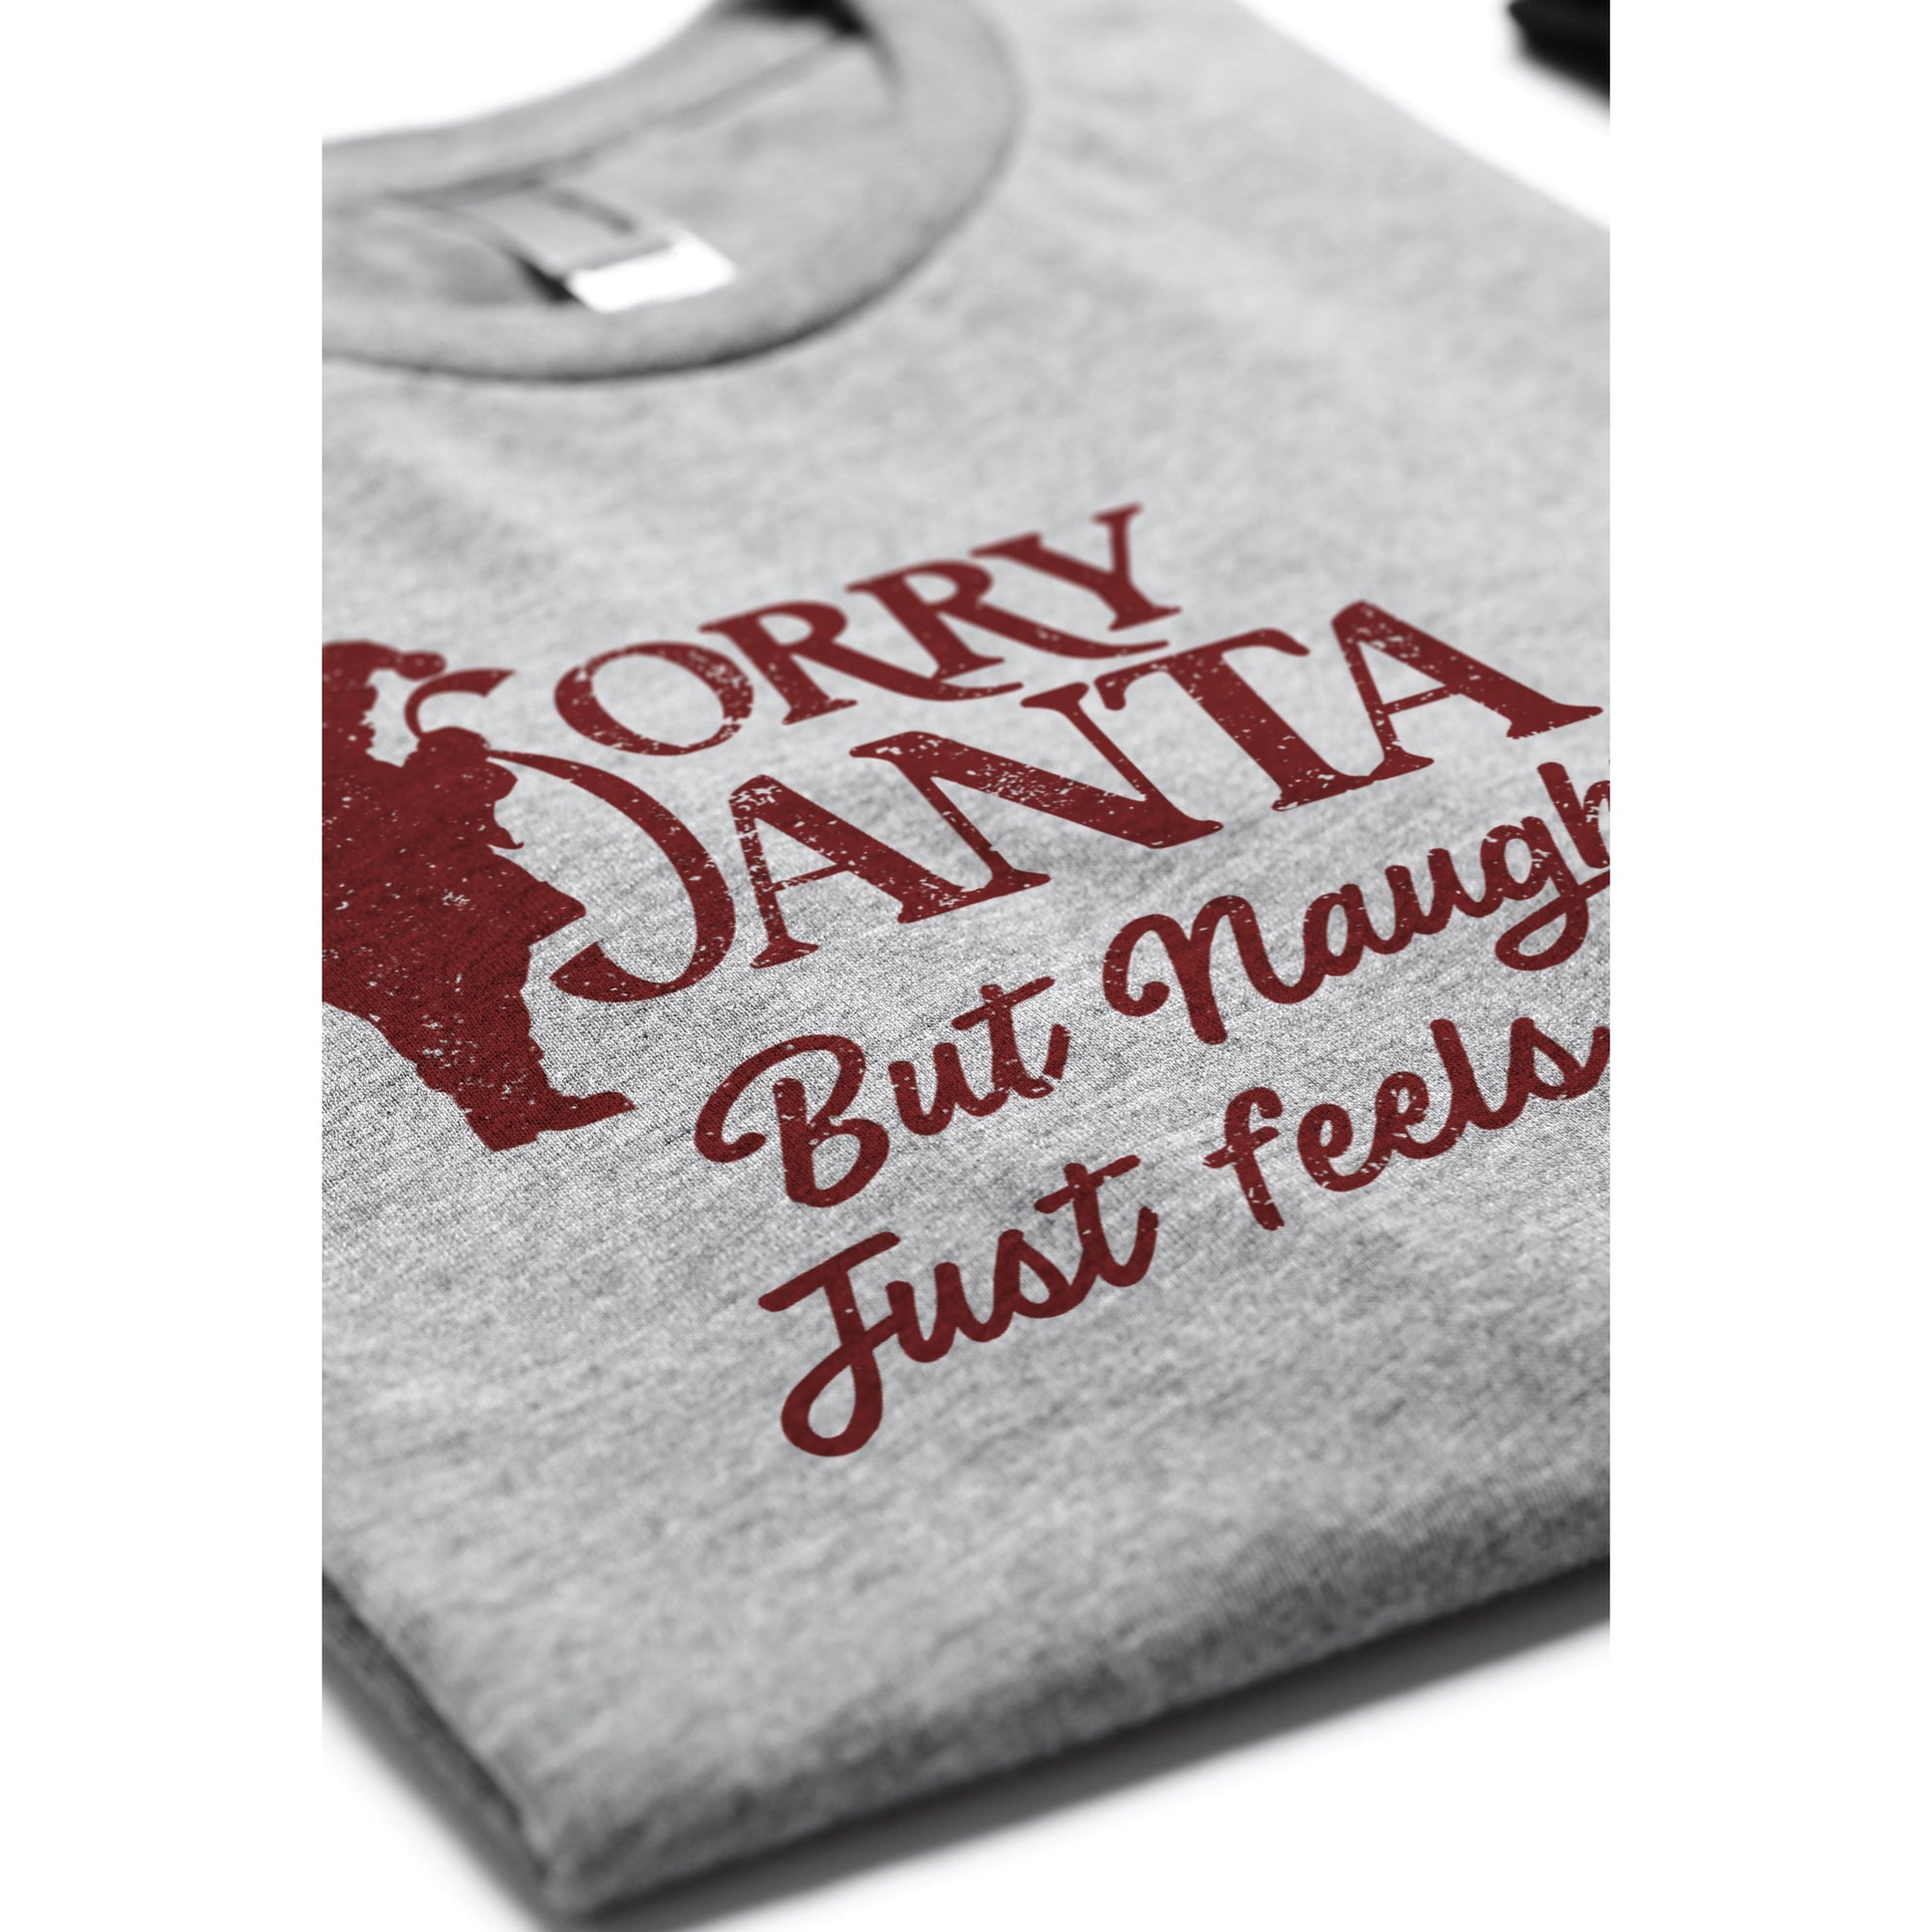 Sorry Santa, But Naughty Just Feels Nice! - threadtank | stories you can wear